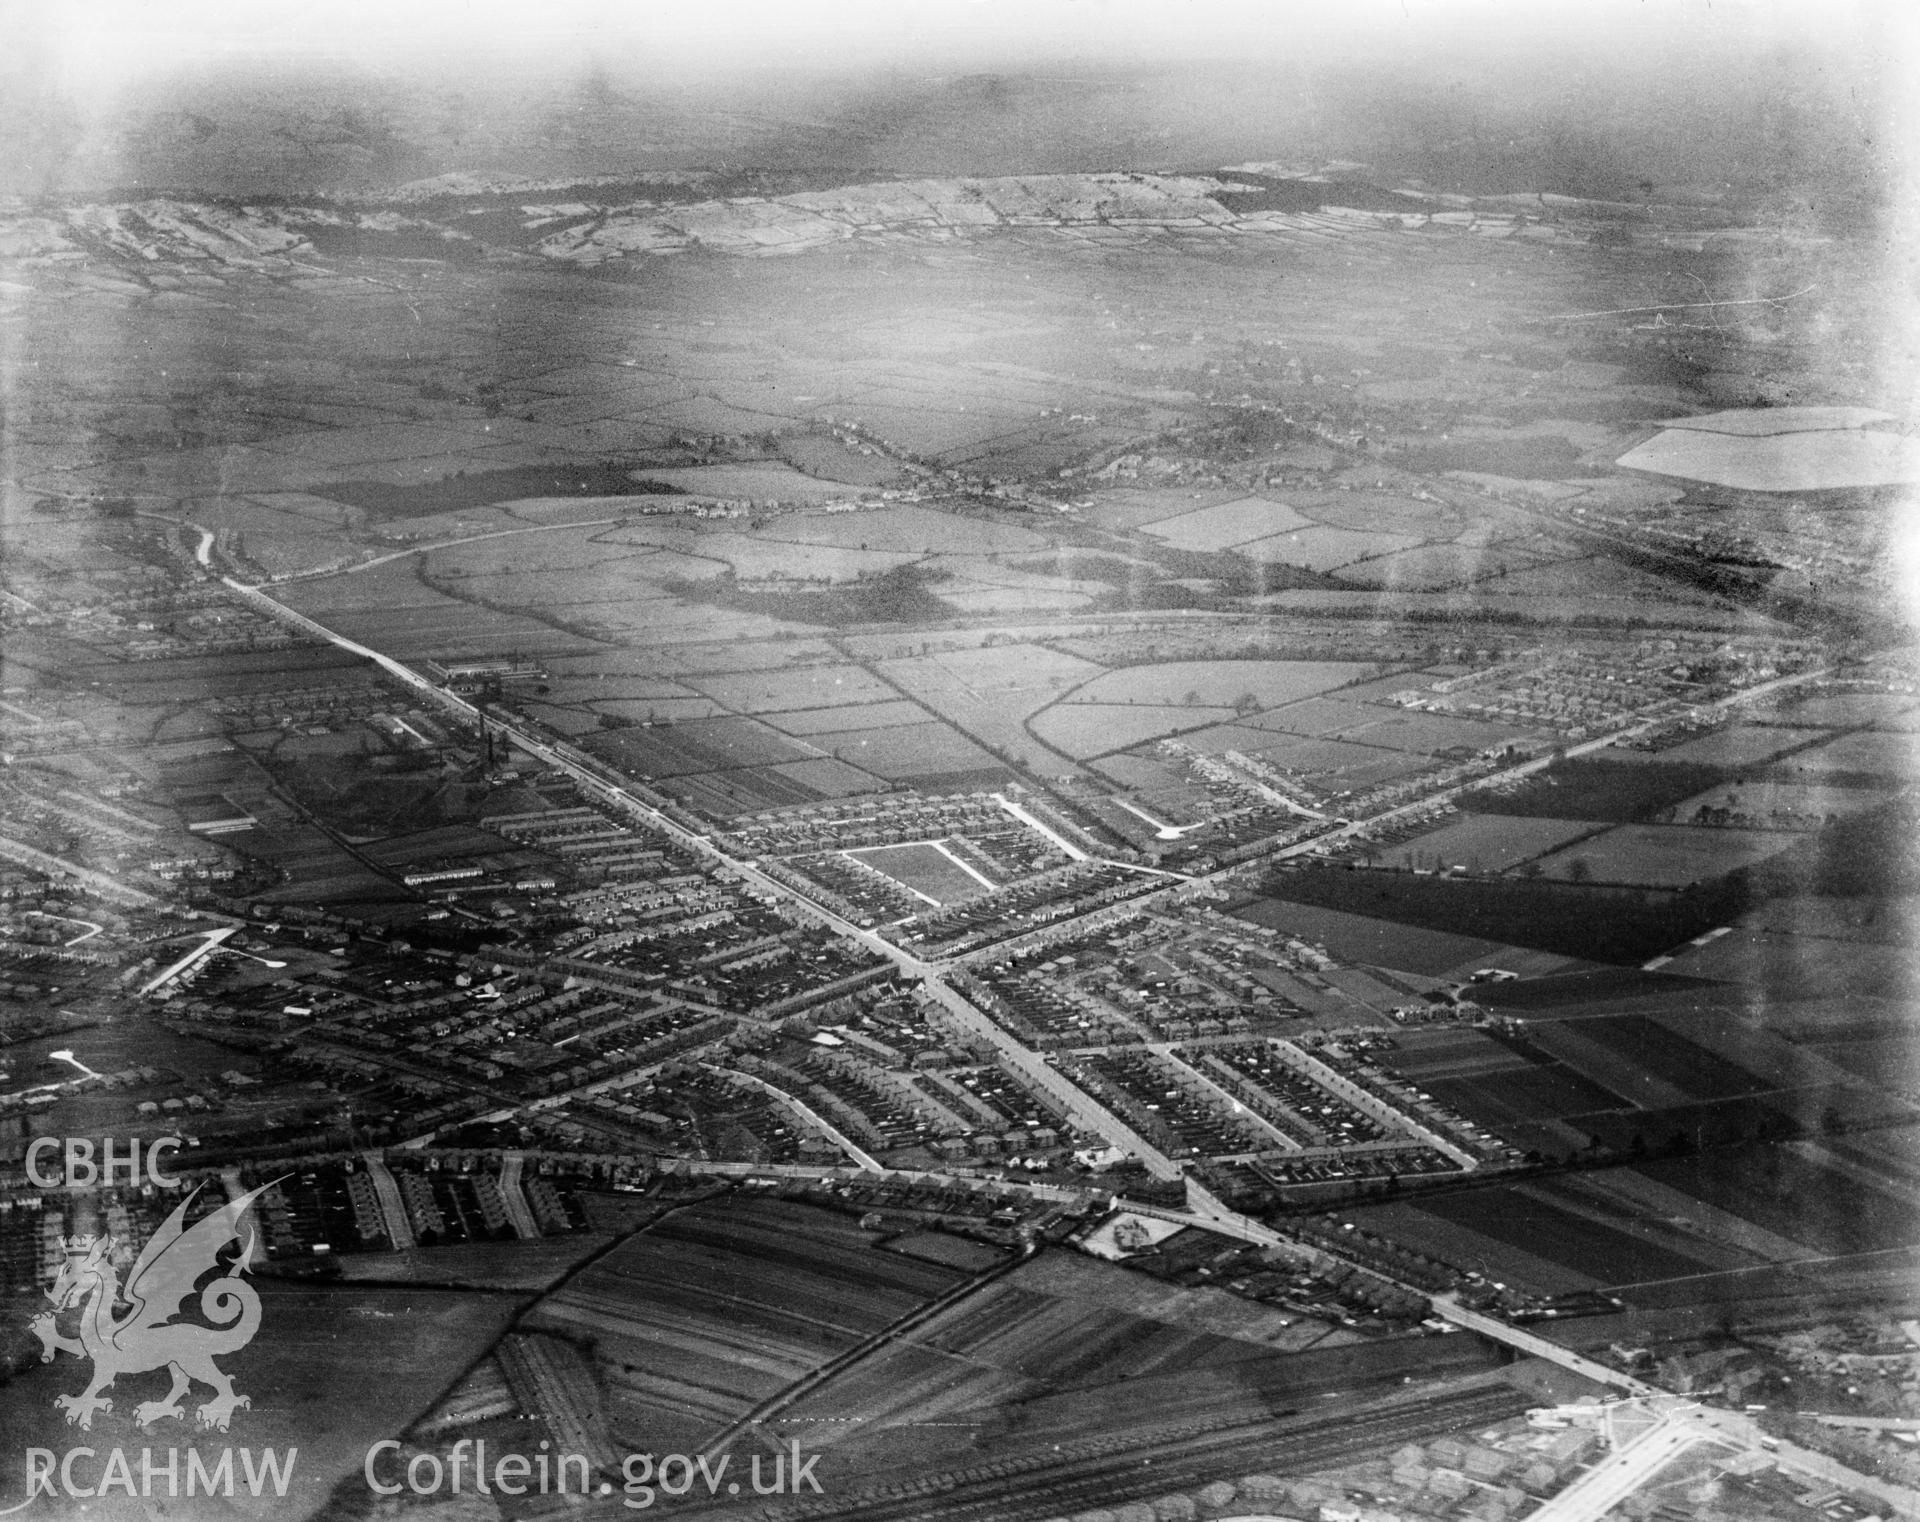 Distant view of new housing at Llanishen near Cardiff, oblique aerial view. 5?x4? black and white glass plate negative.